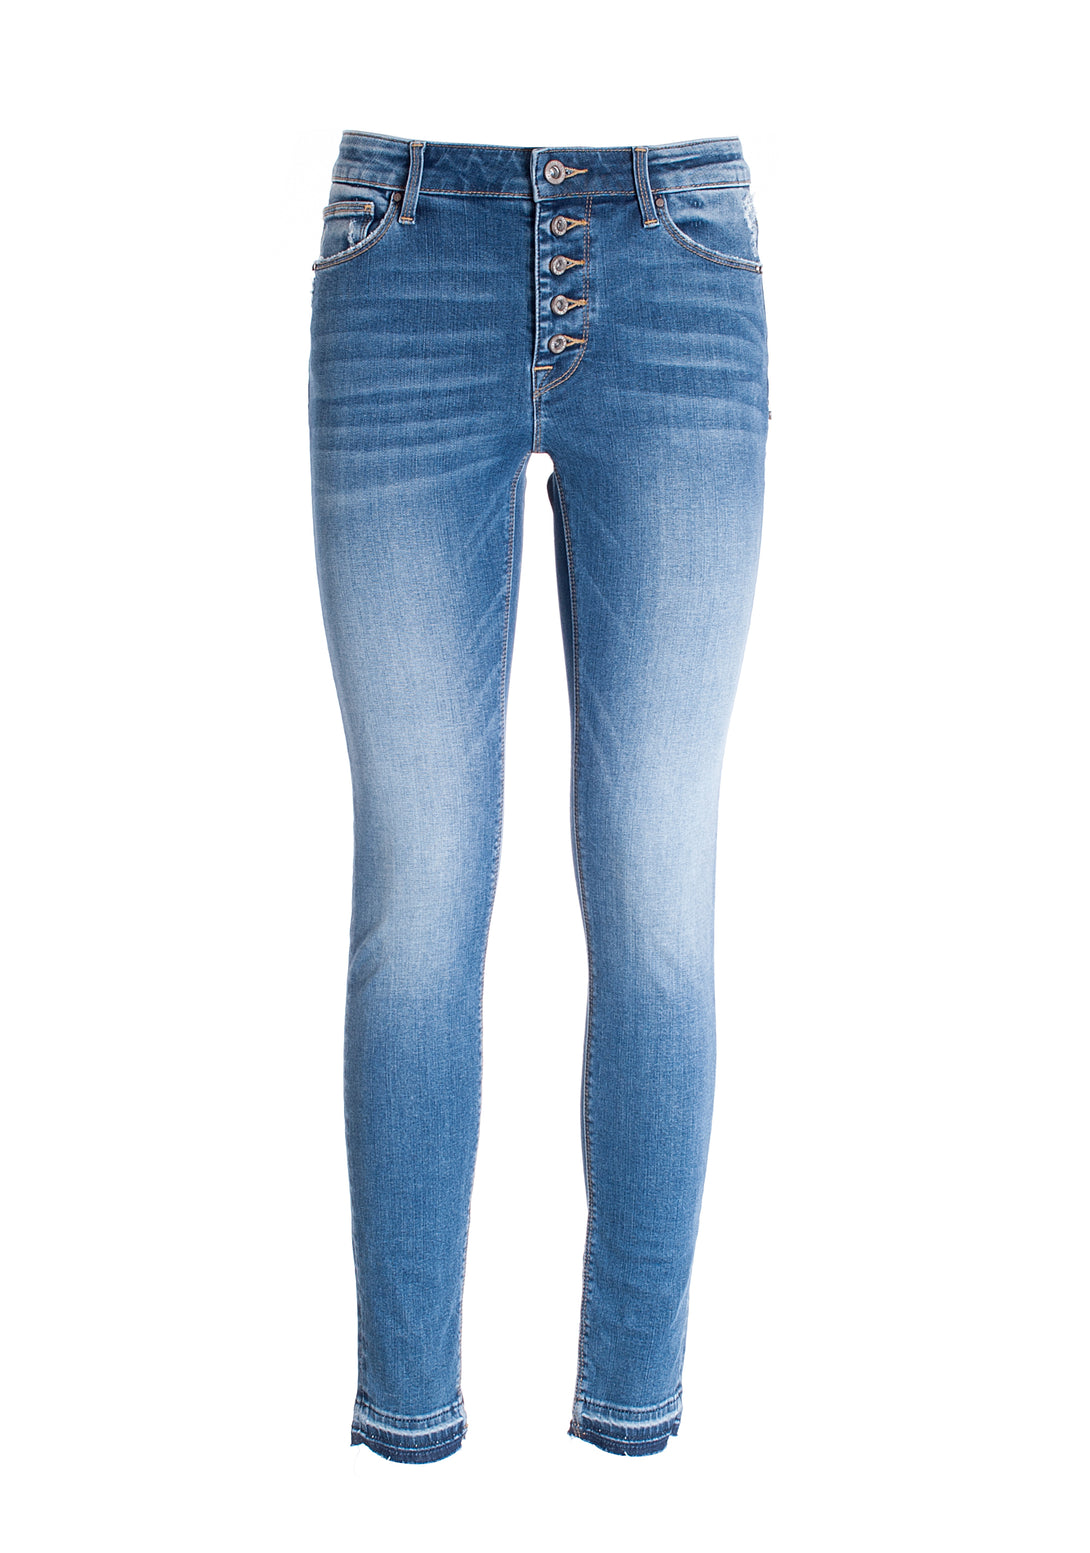 Jeans skinny made in denim with middle wash